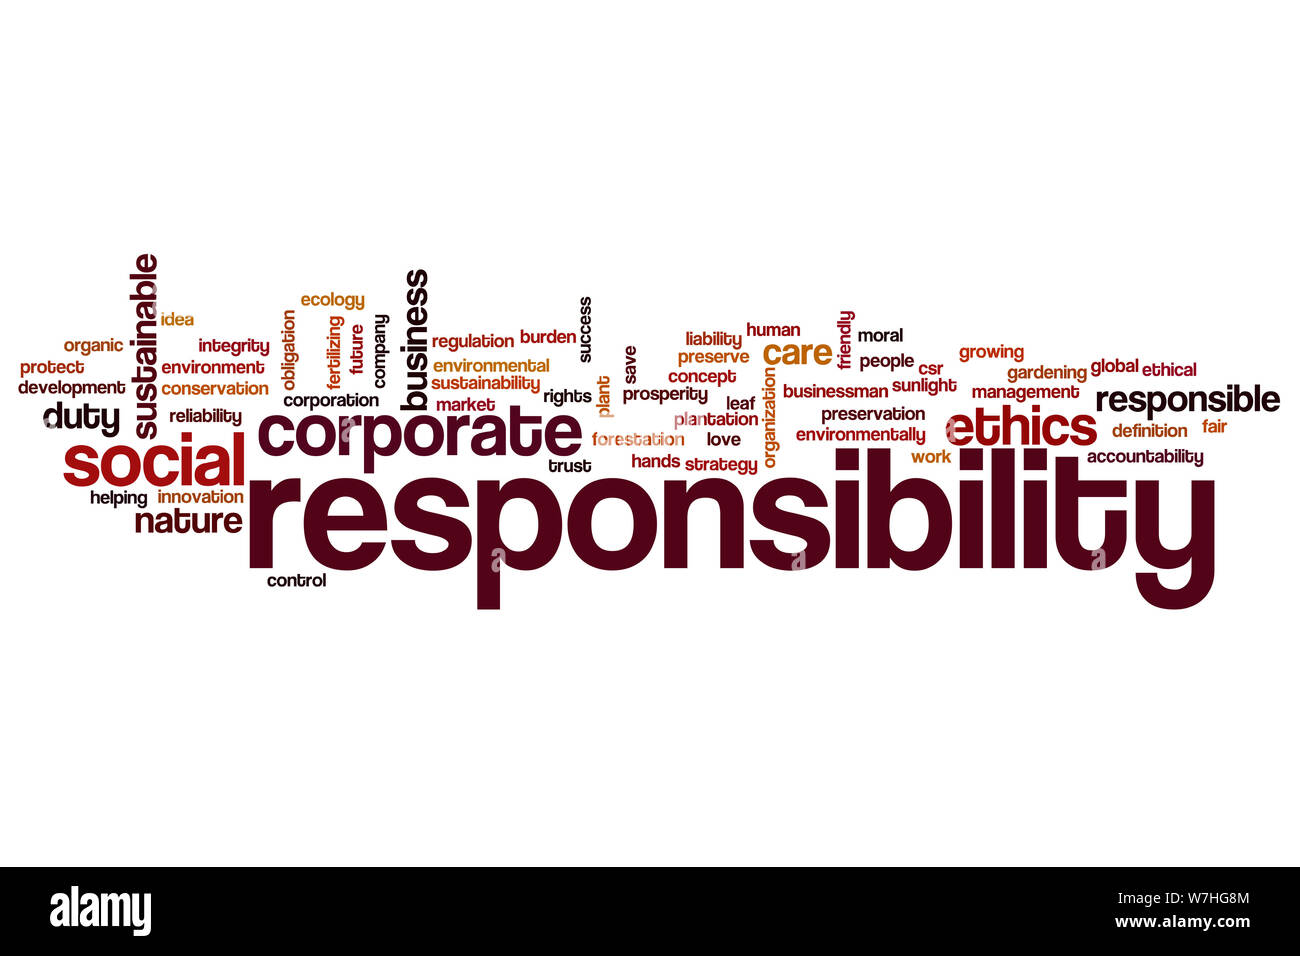 Responsibility word cloud concept Stock Photo